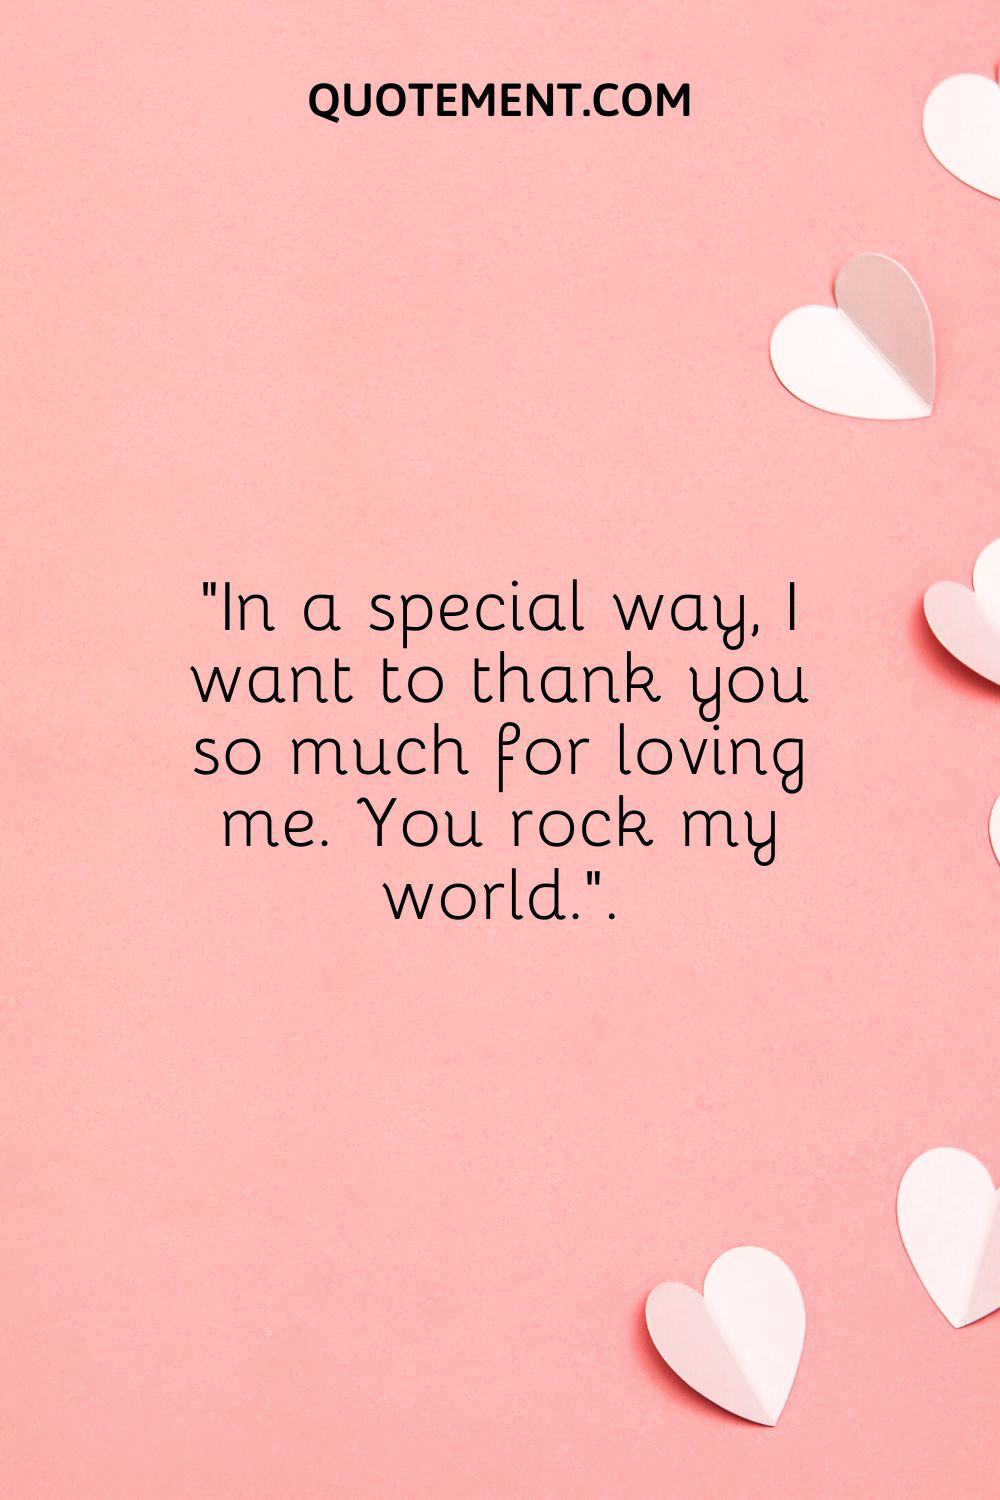 In a special way, I want to thank you so much for loving me.